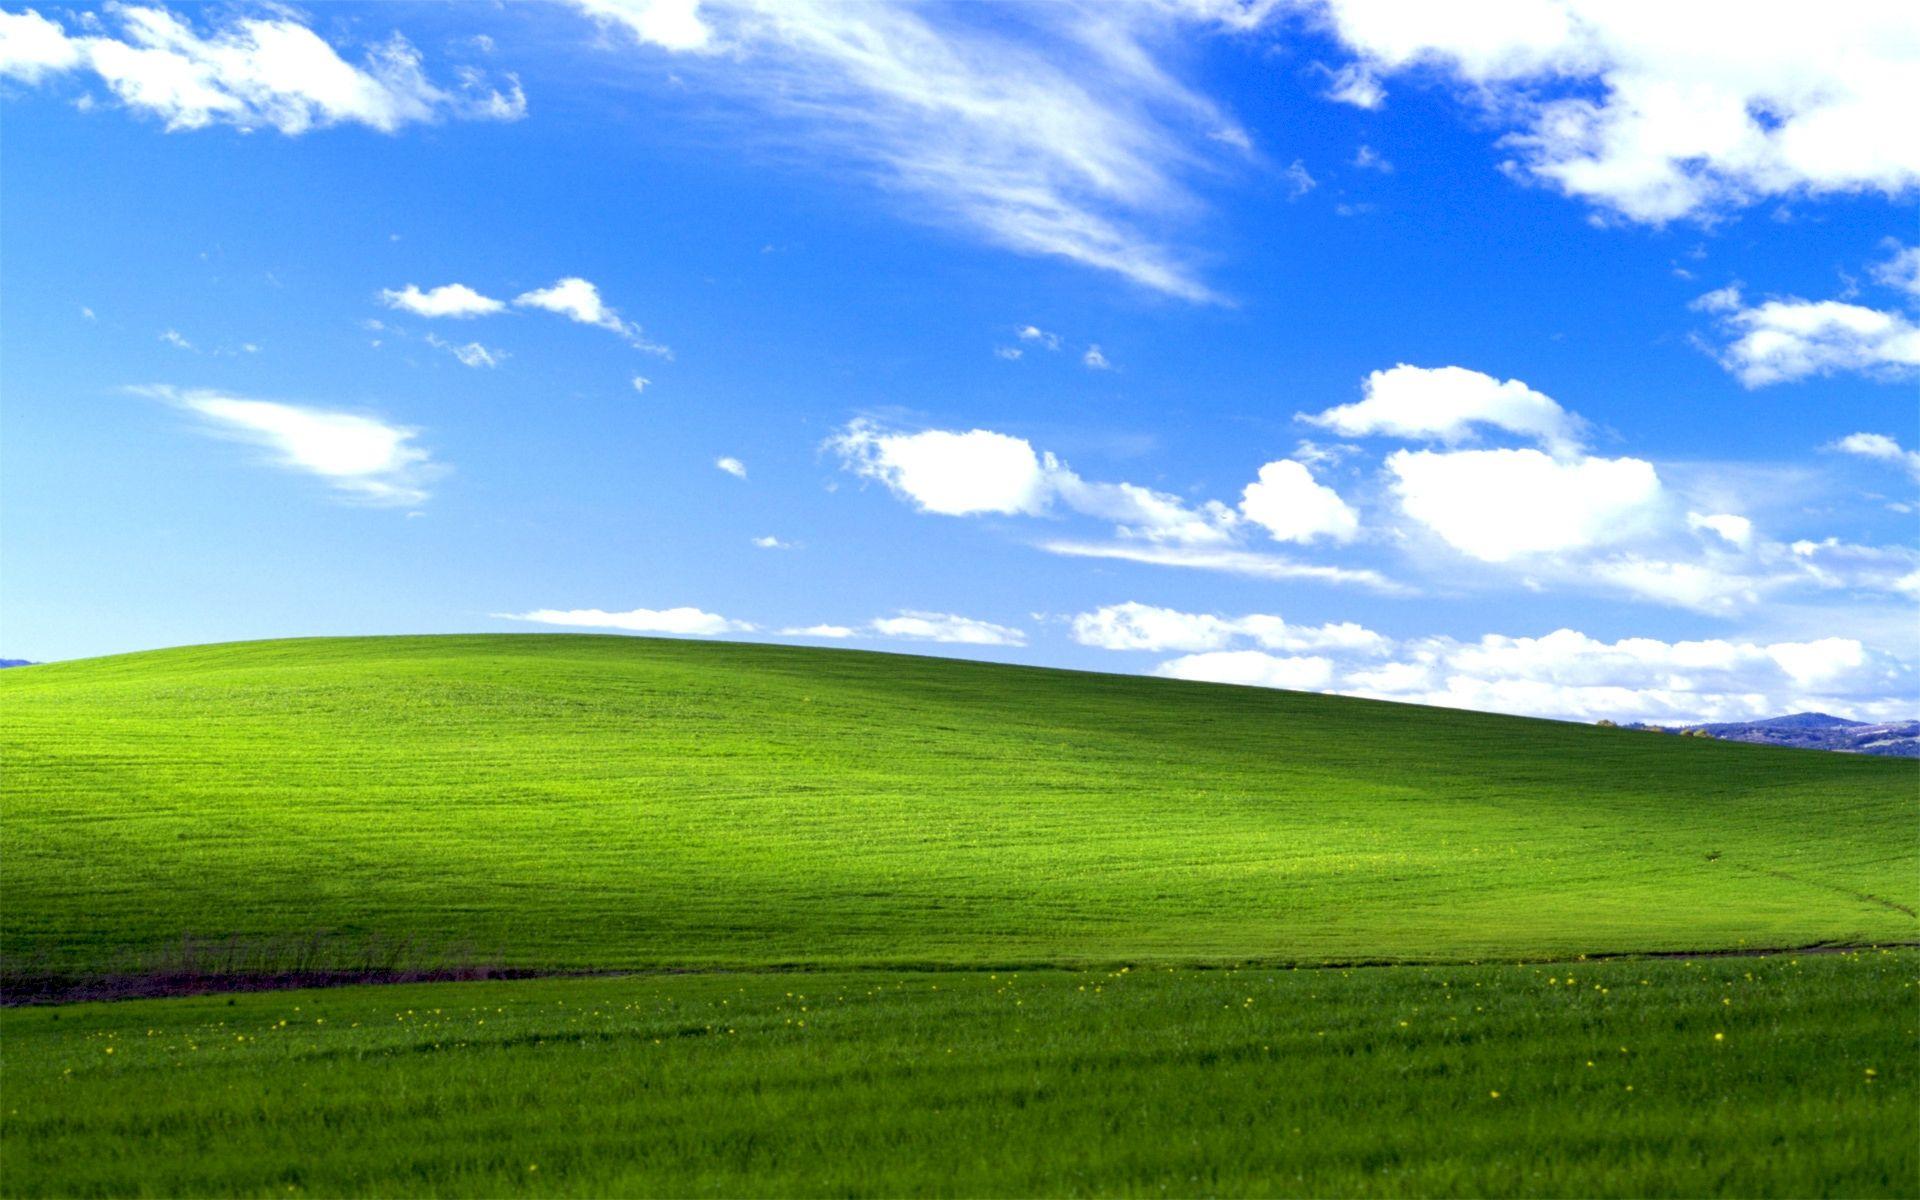 The Classic Windows XP Field and Sky Background